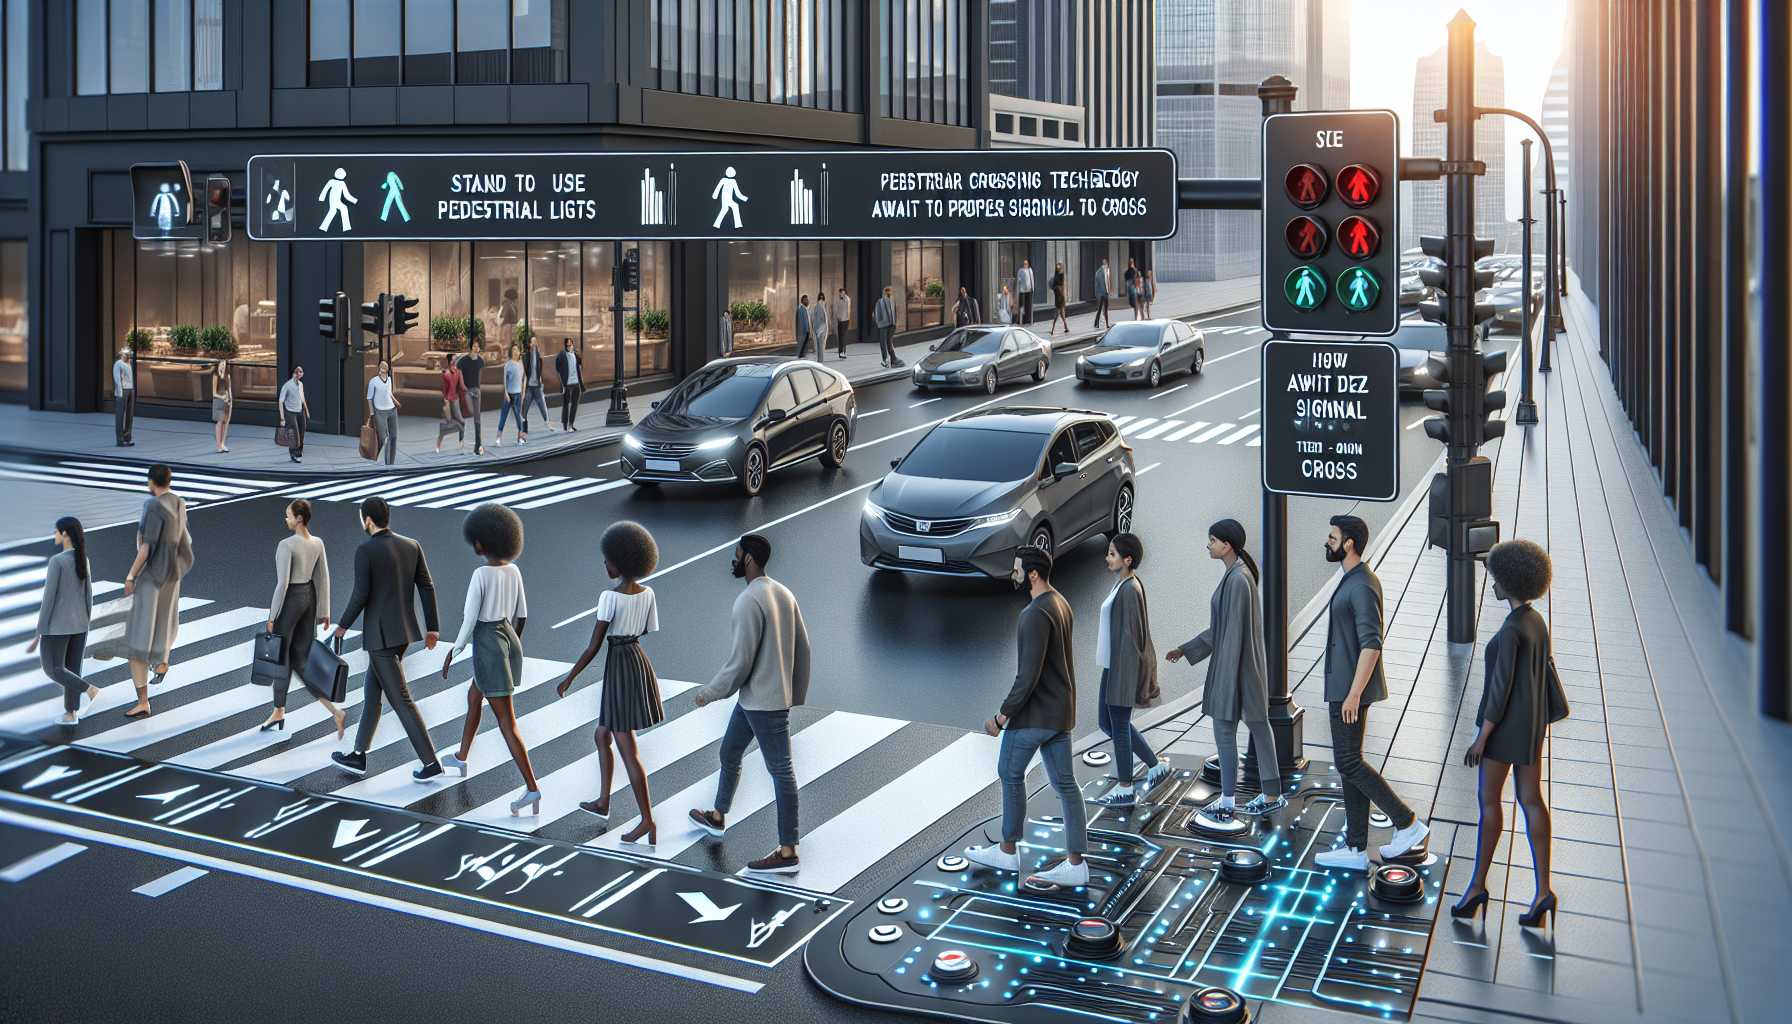 Smart pedestrian crossing technology integrated with traffic signals for safety